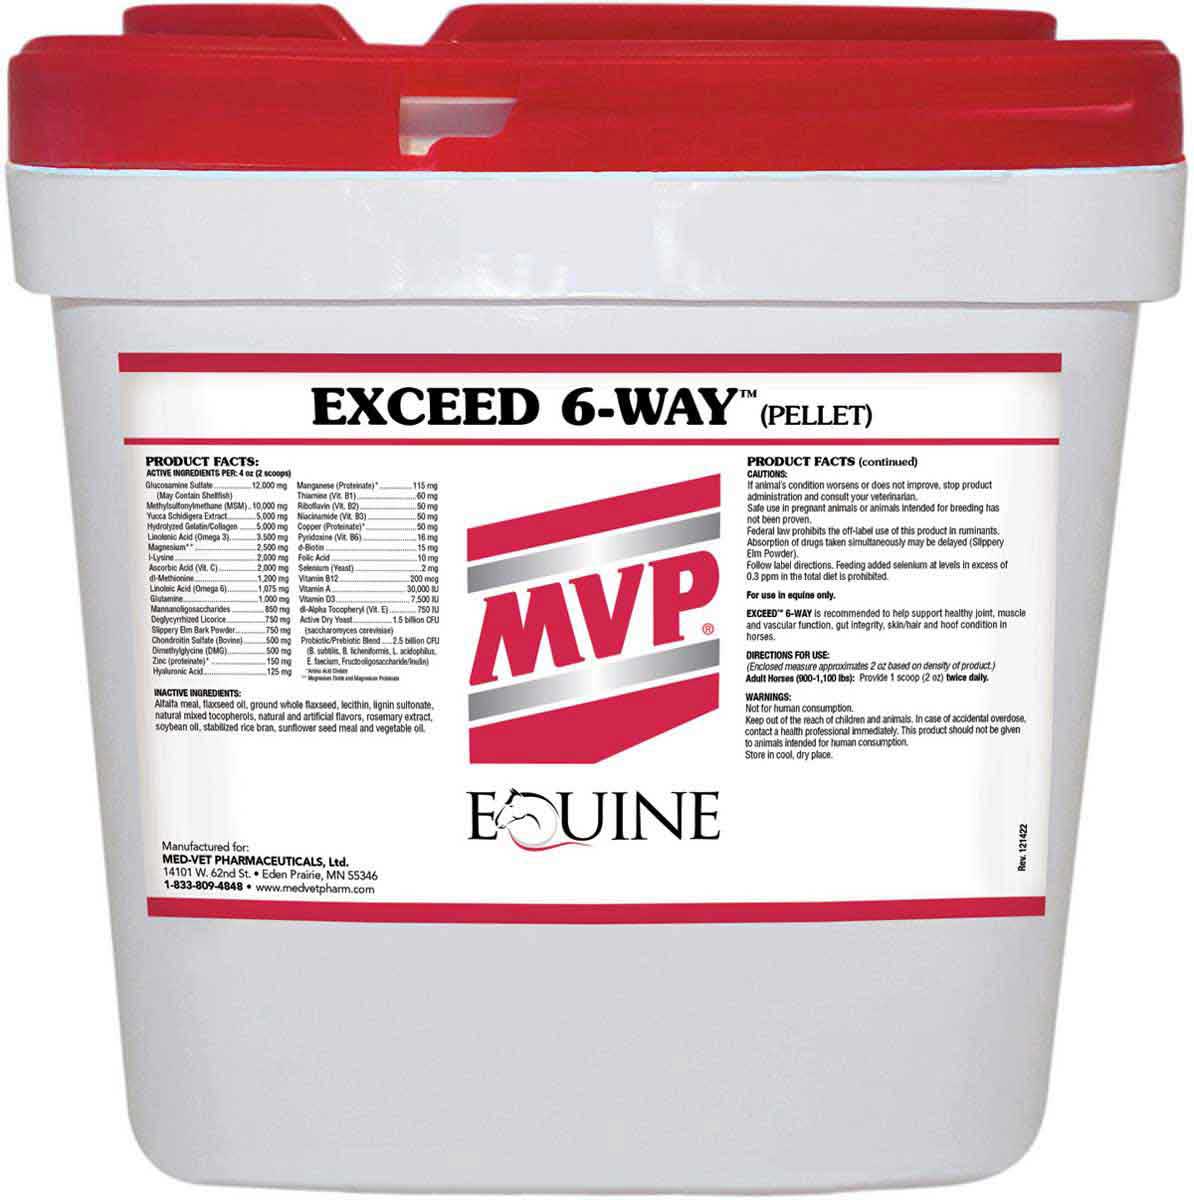 What is the best equine joint supplement?